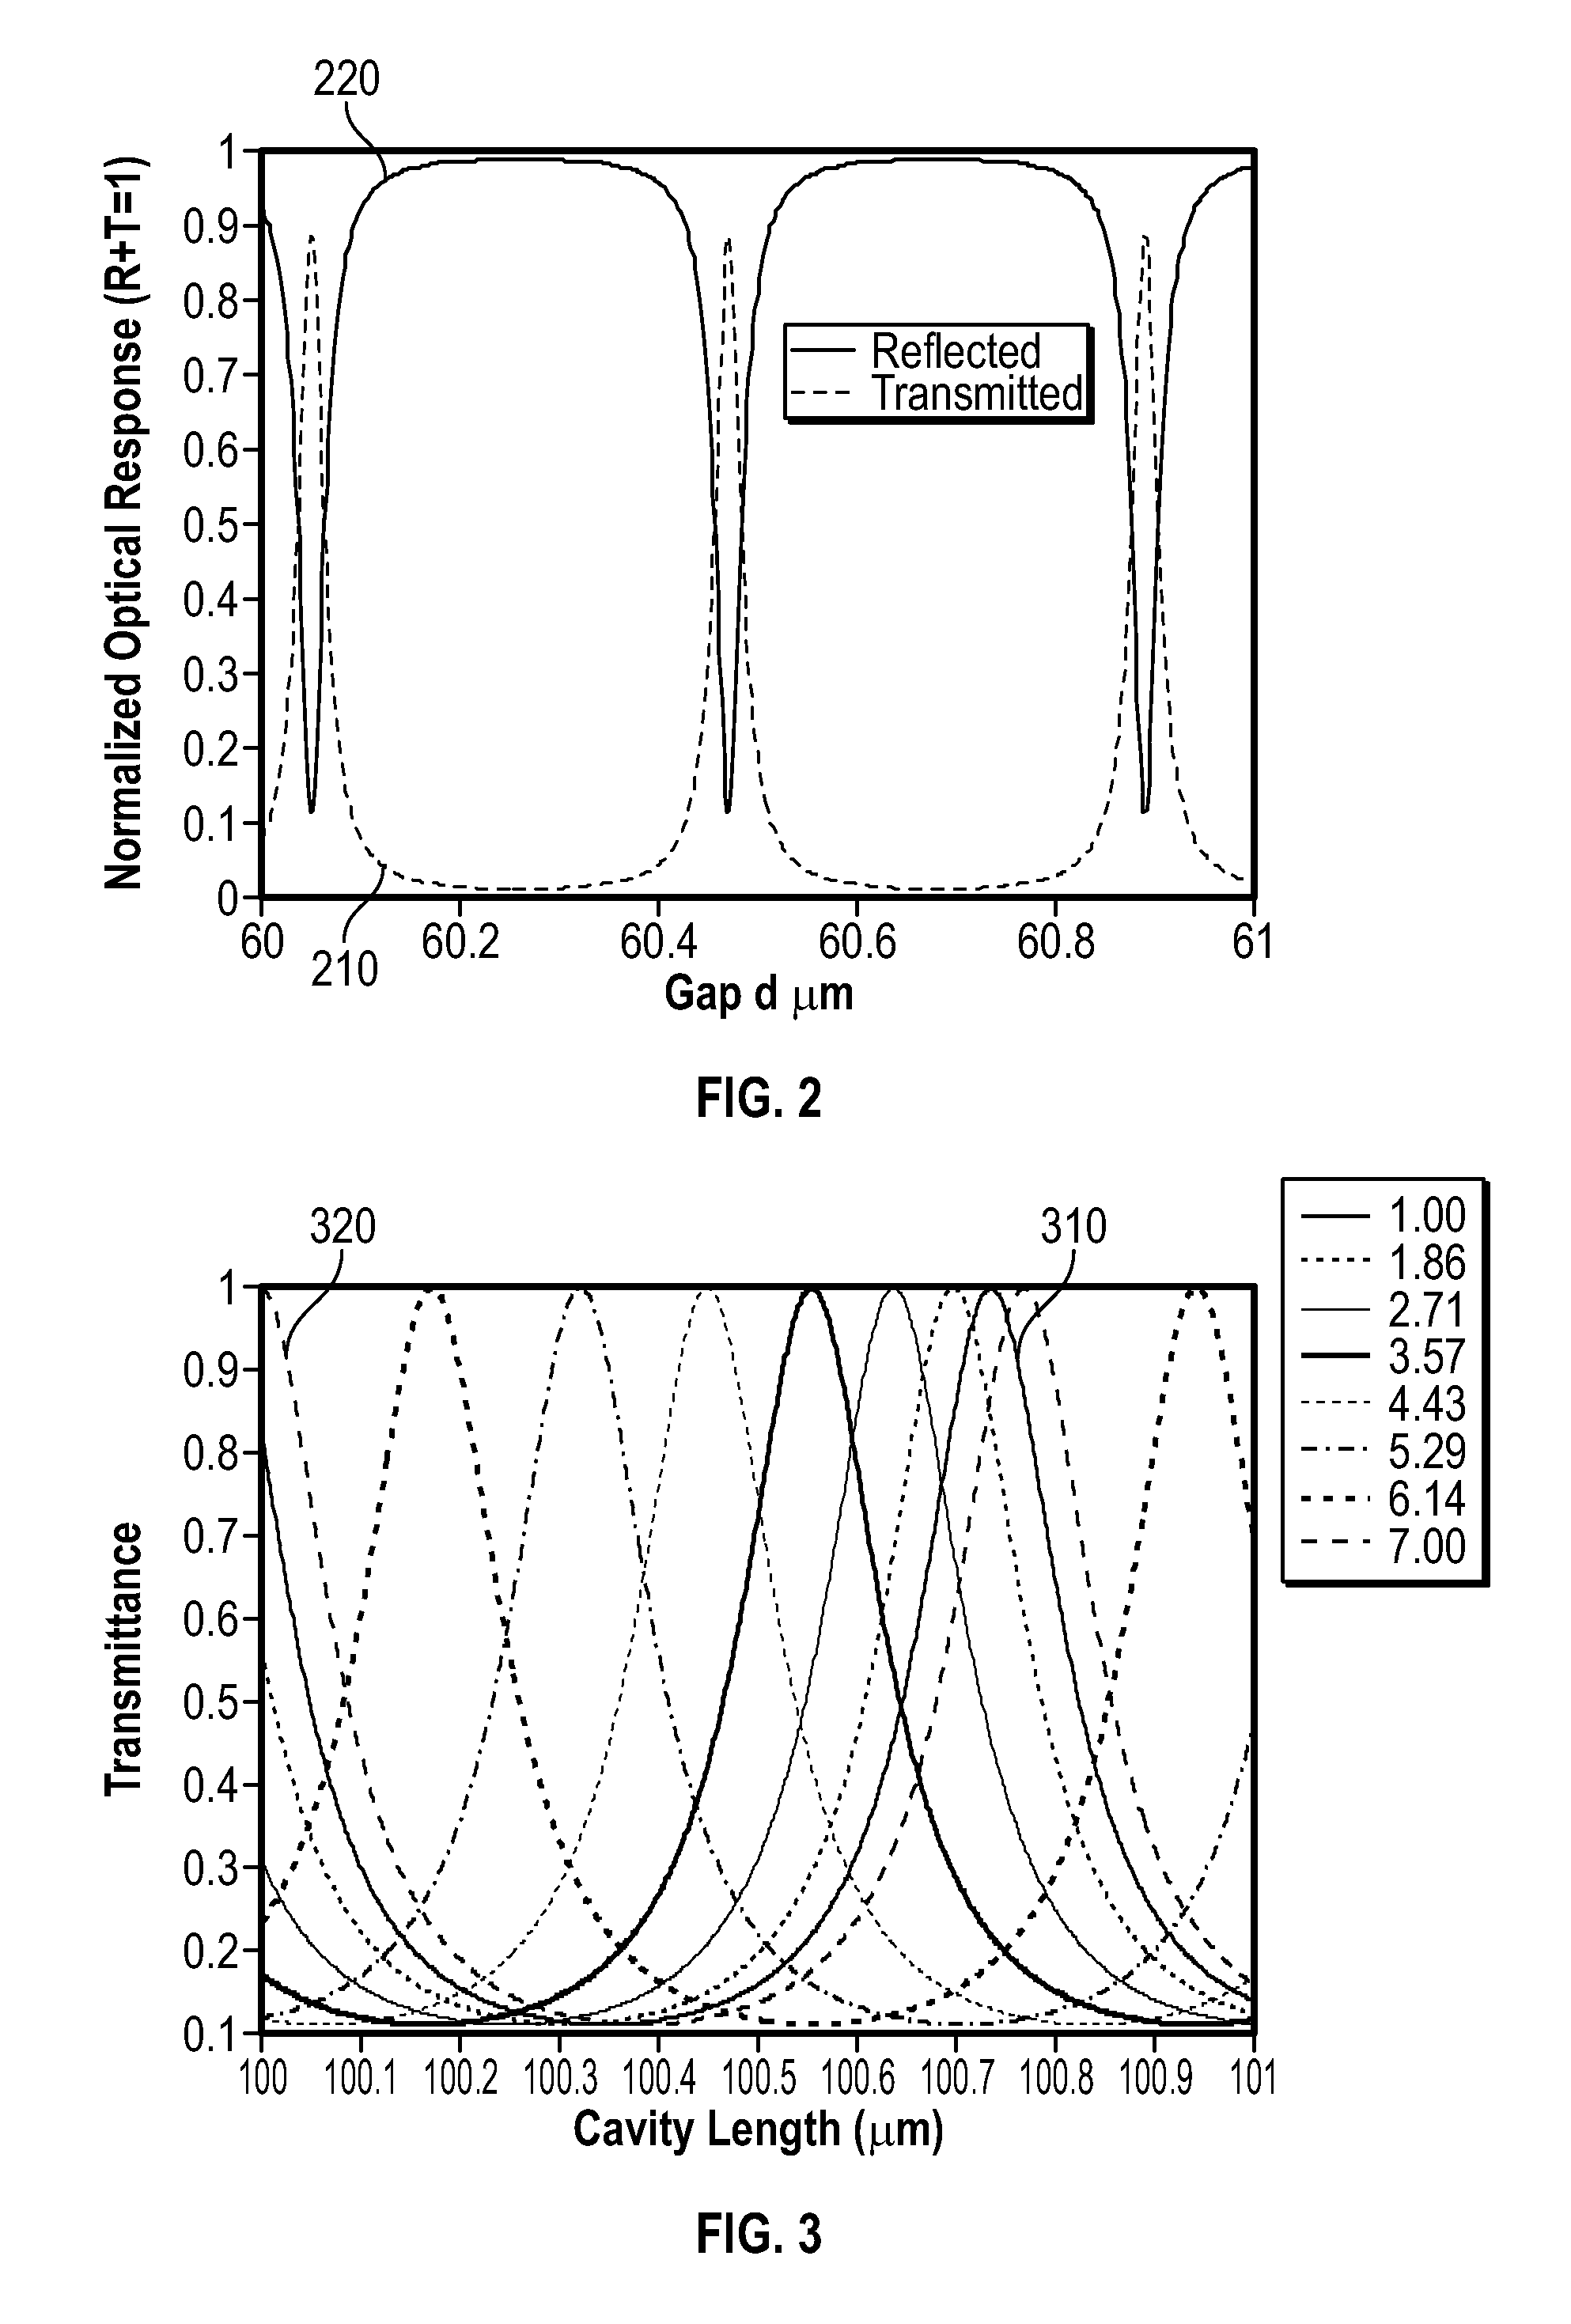 Apparatus to Reduce Pressure and Thermal Sensitivity of High Precision Optical Displacement Sensors